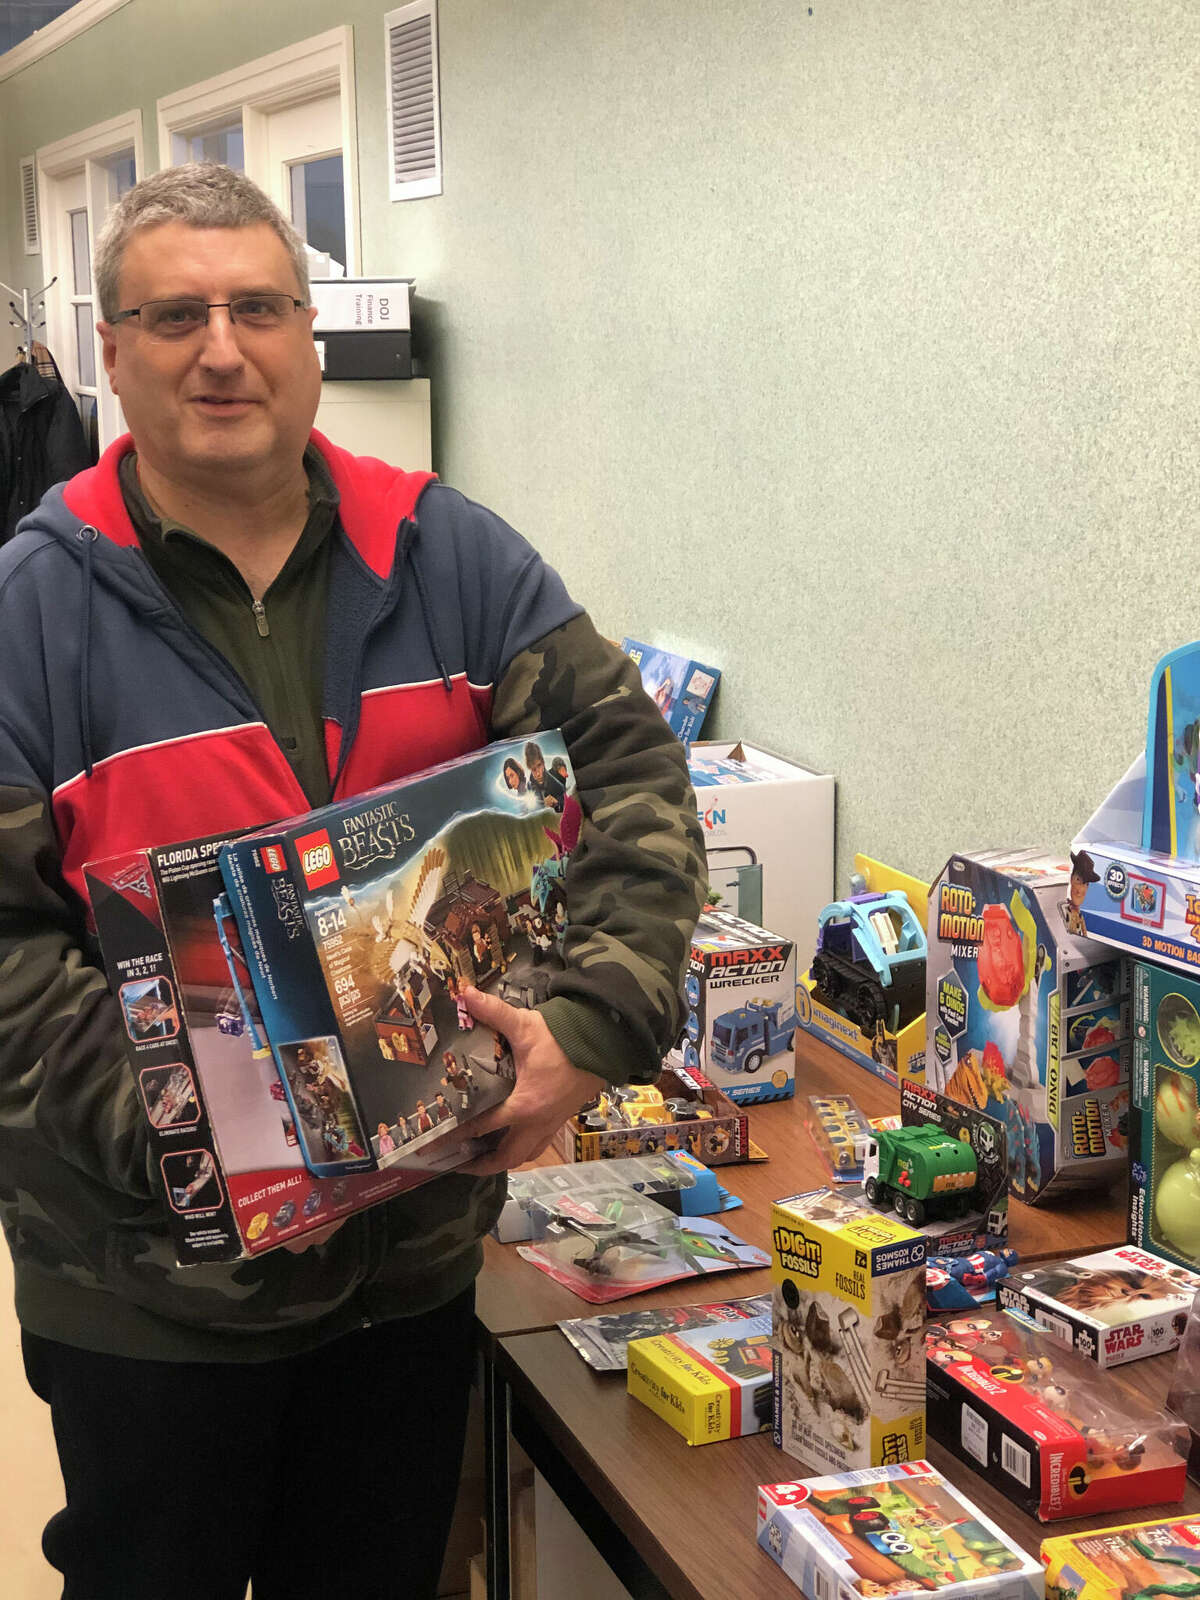 Vinny DiNatale, a Big Brother volunteer, is marking 10 years of hosting toy drives benefiting the families the organization serves.